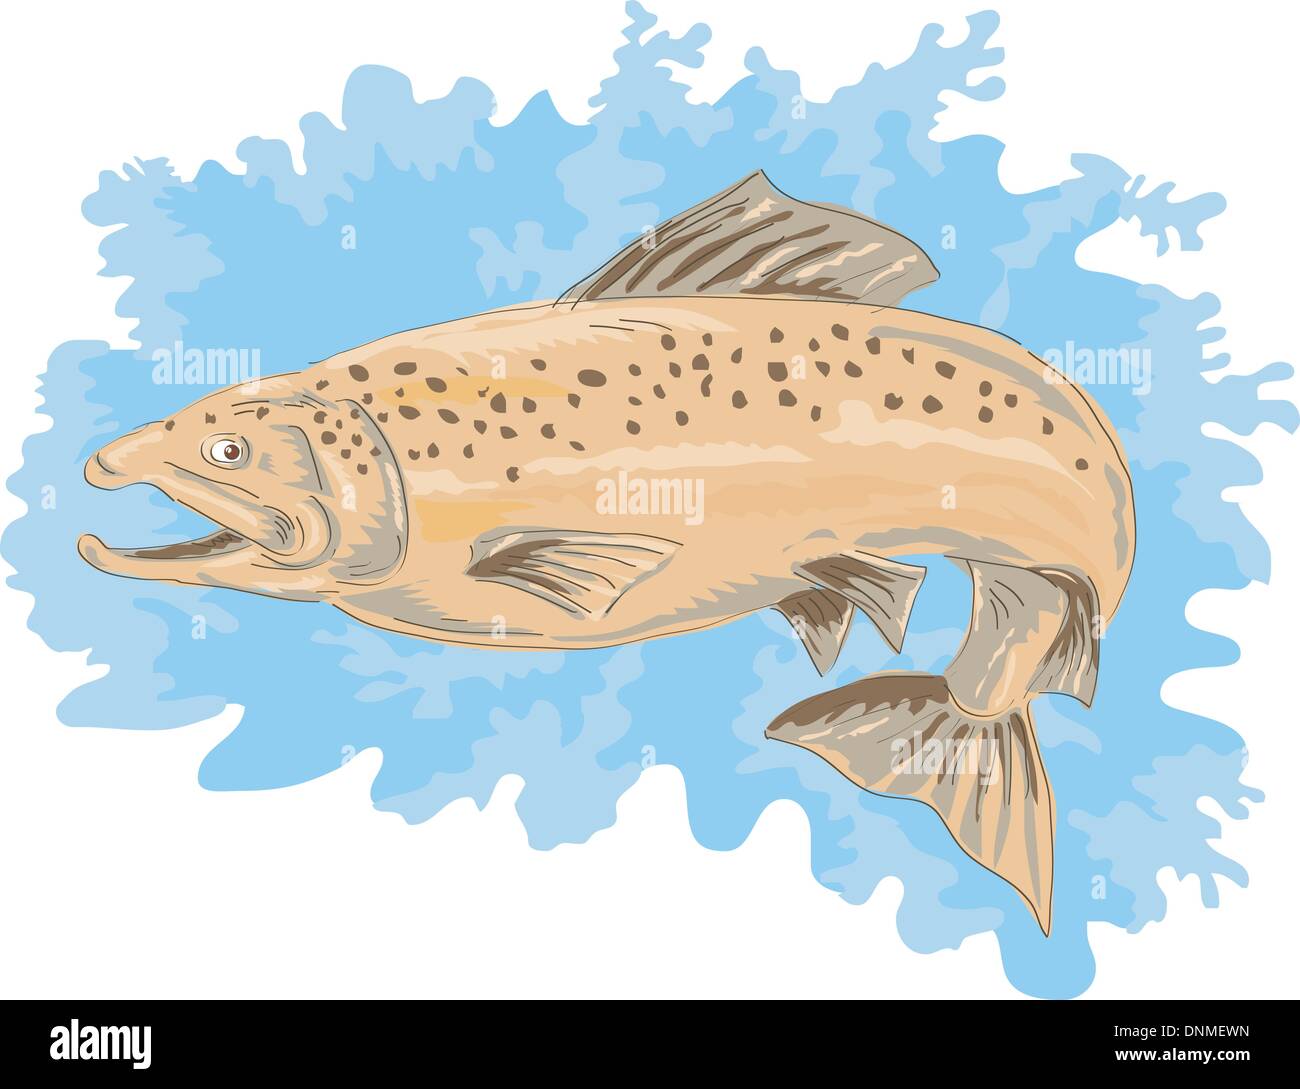 illustration of a trout fish jumping done in retro style Stock Vector